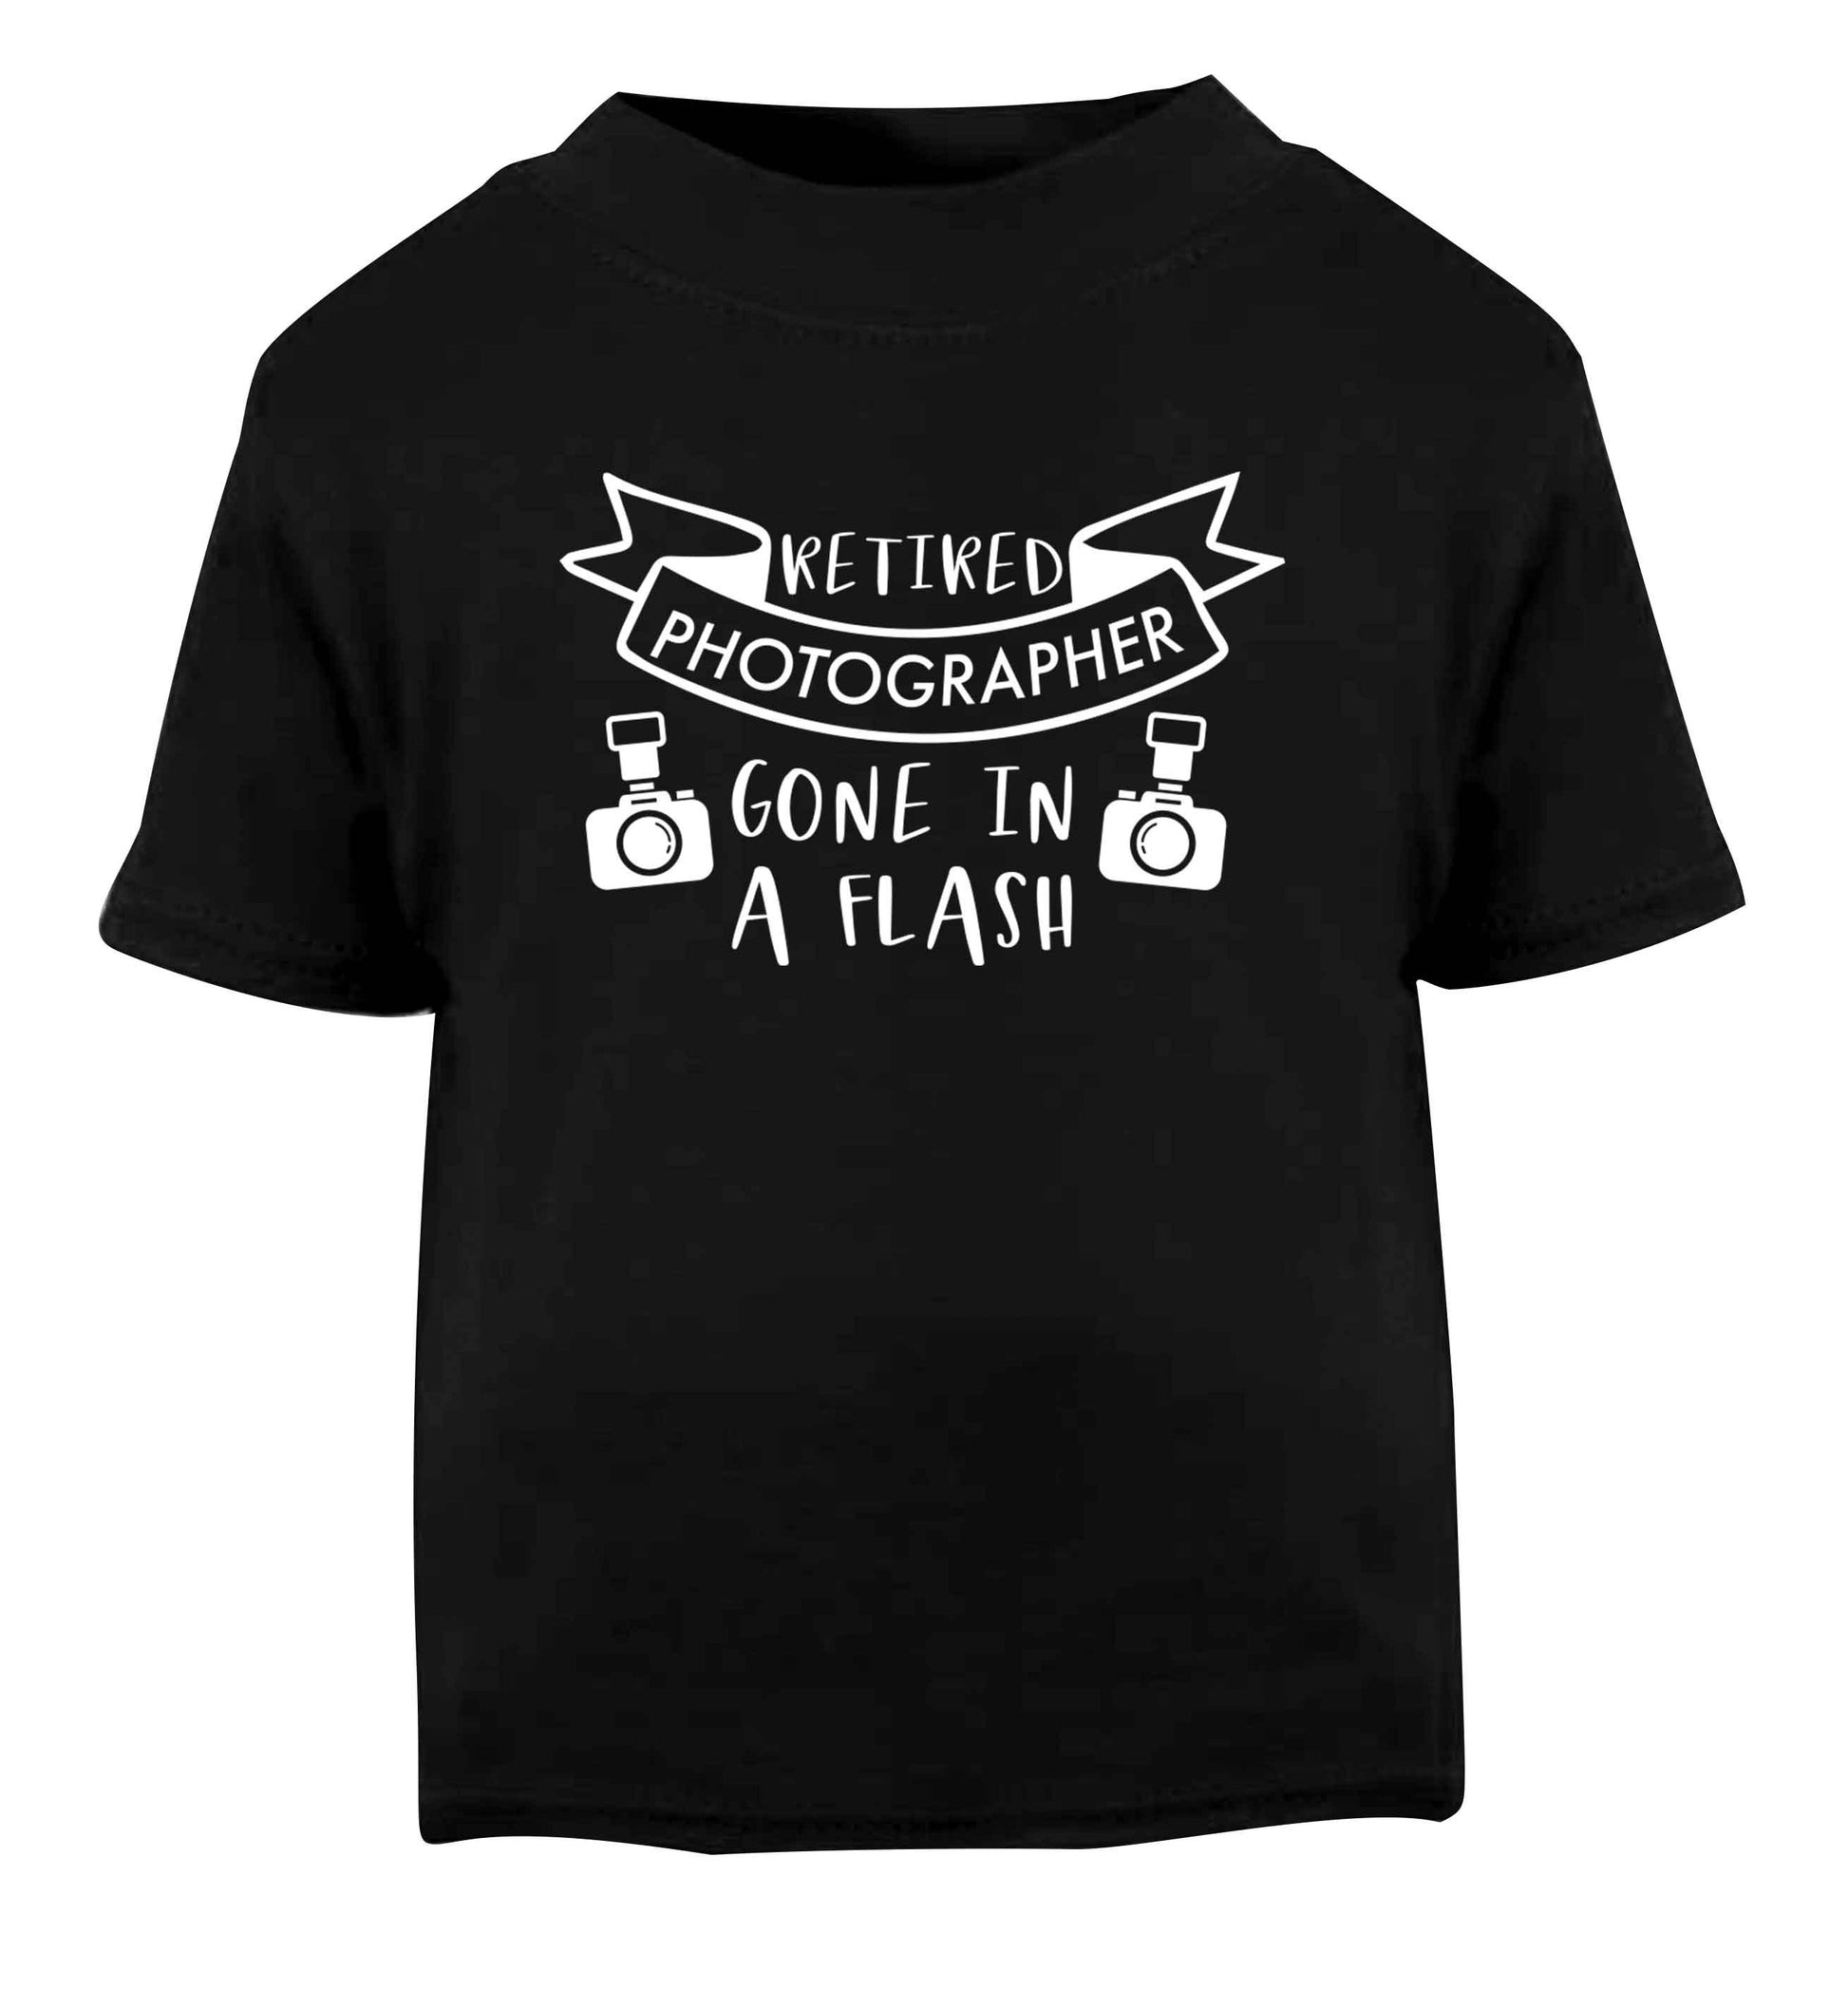 Retired photographer gone in a flash Black Baby Toddler Tshirt 2 years